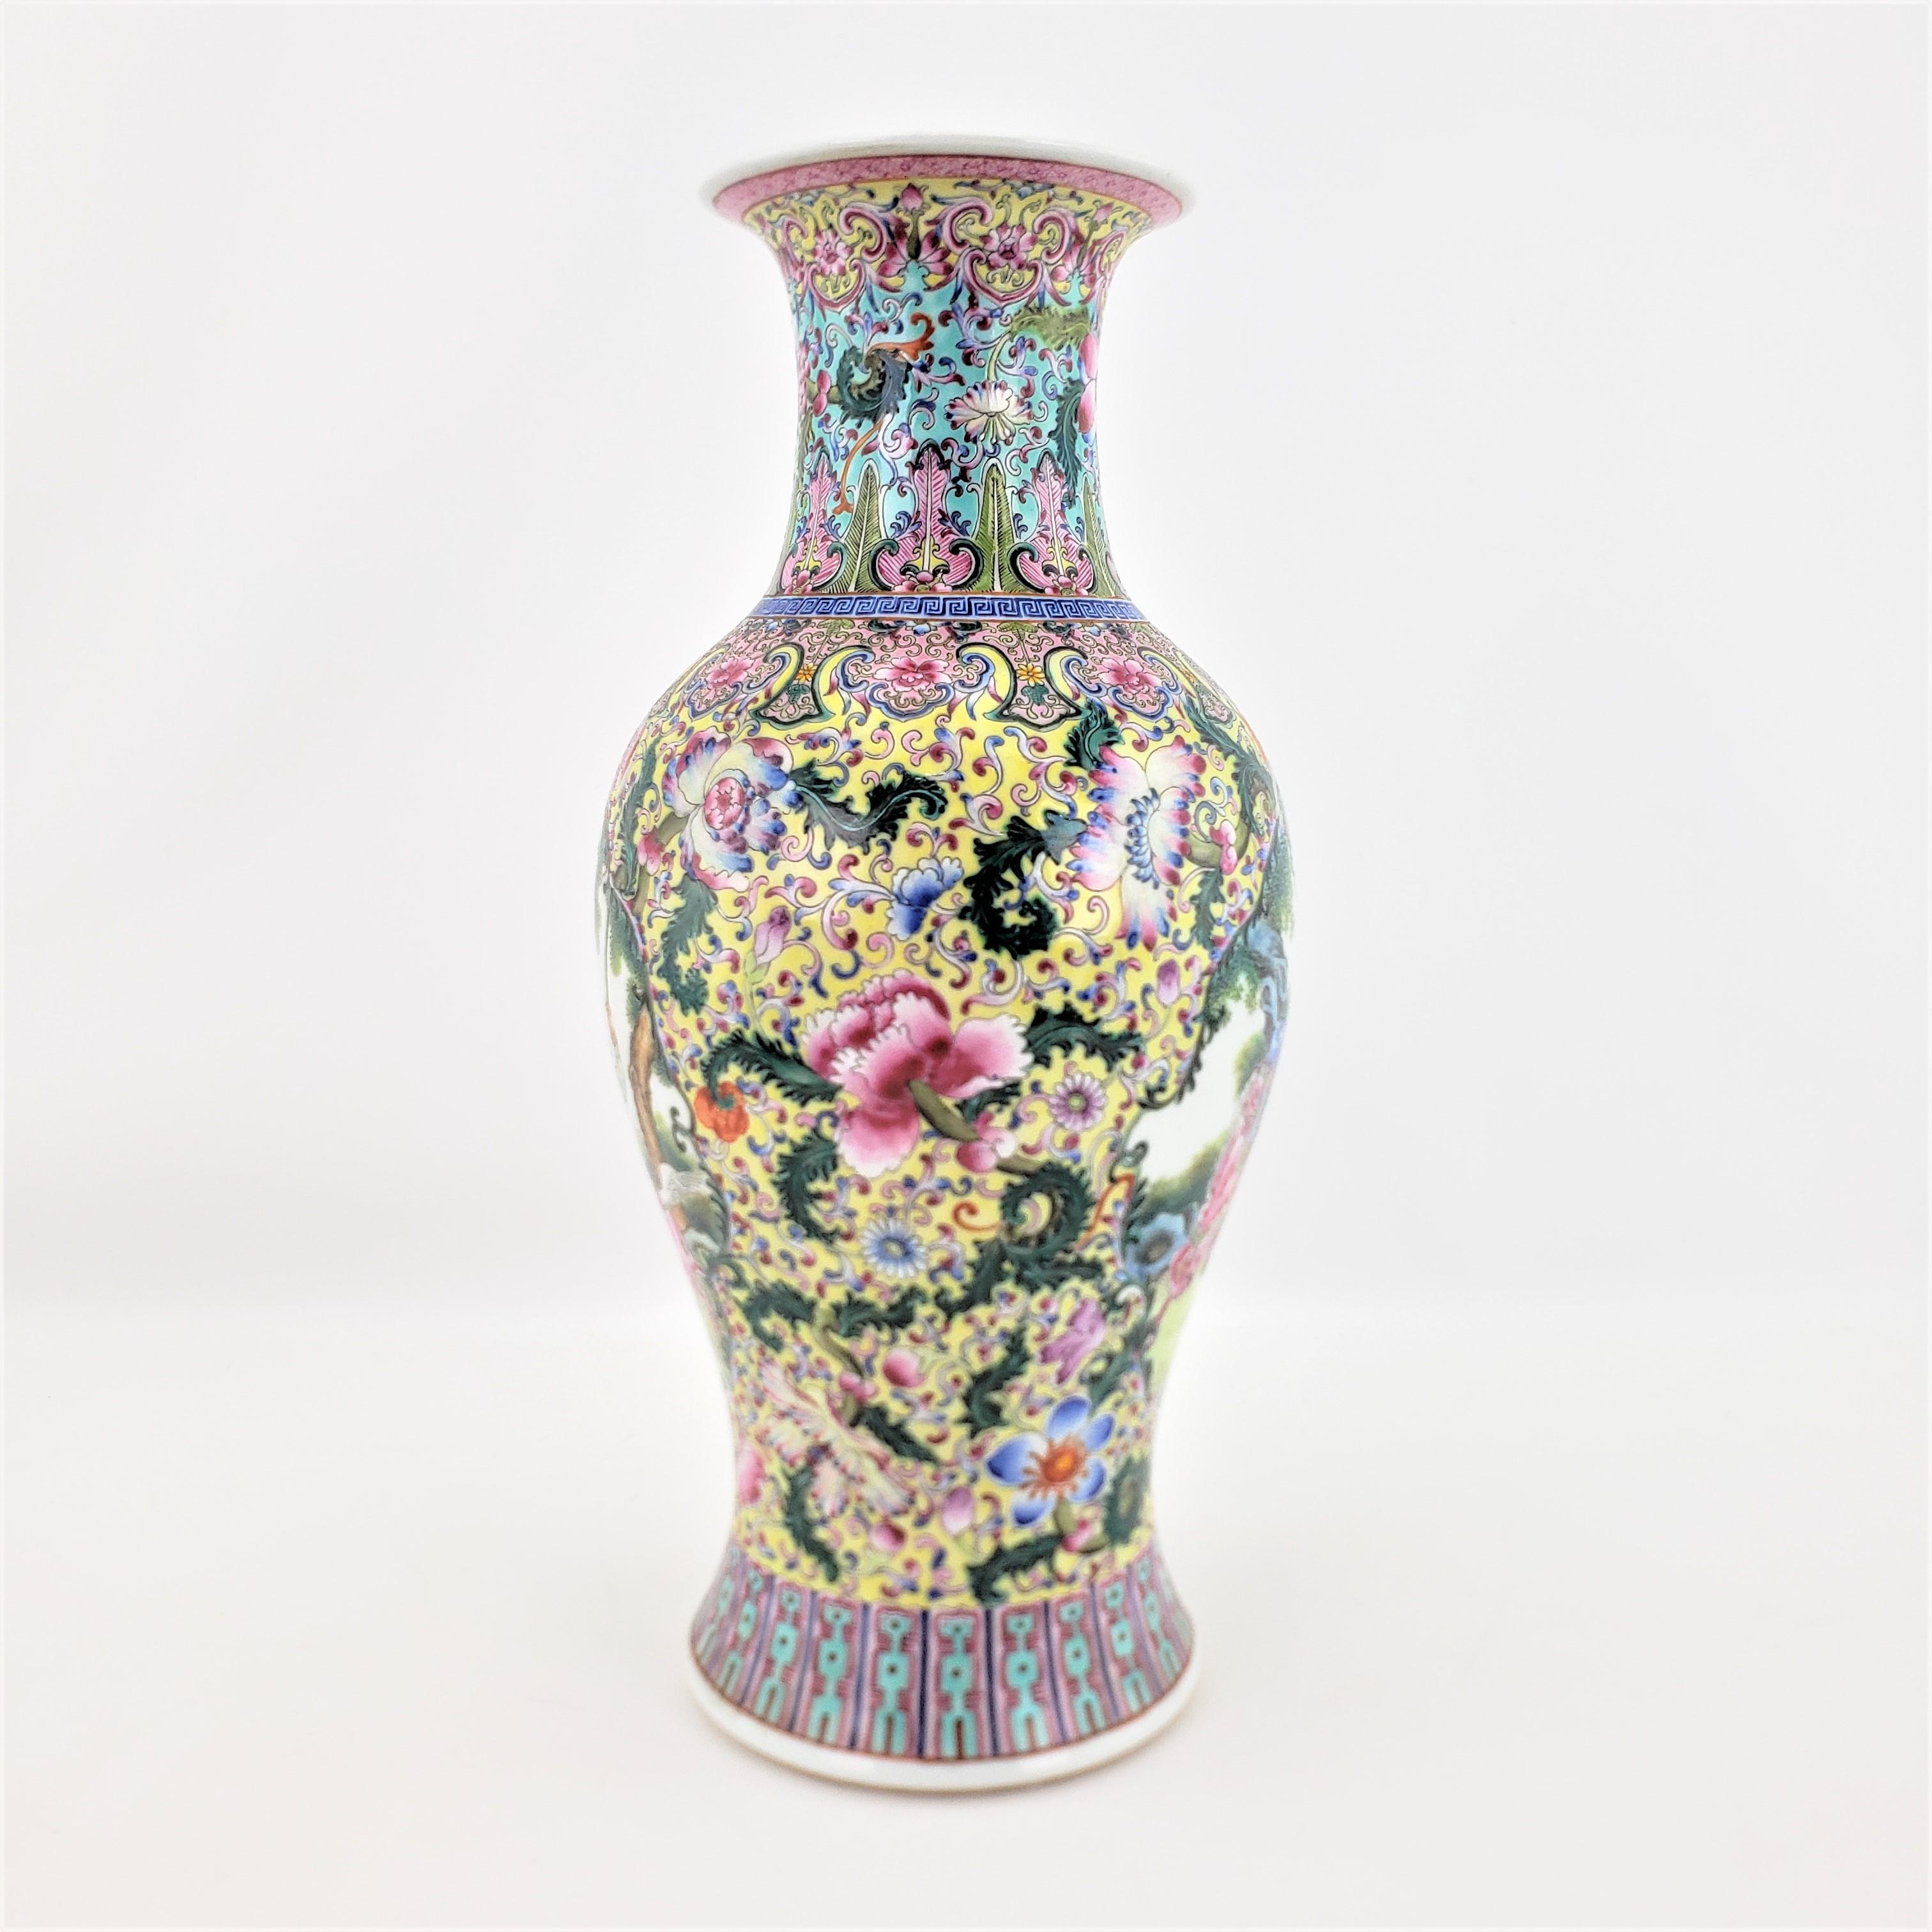 This antique and intricately hand-painted vase is signed on the base, but we were unable to identify the maker, but originates from China and dates to approximately 1920 and done in a Chinese Export style. The vase, which was once a lamp base, is